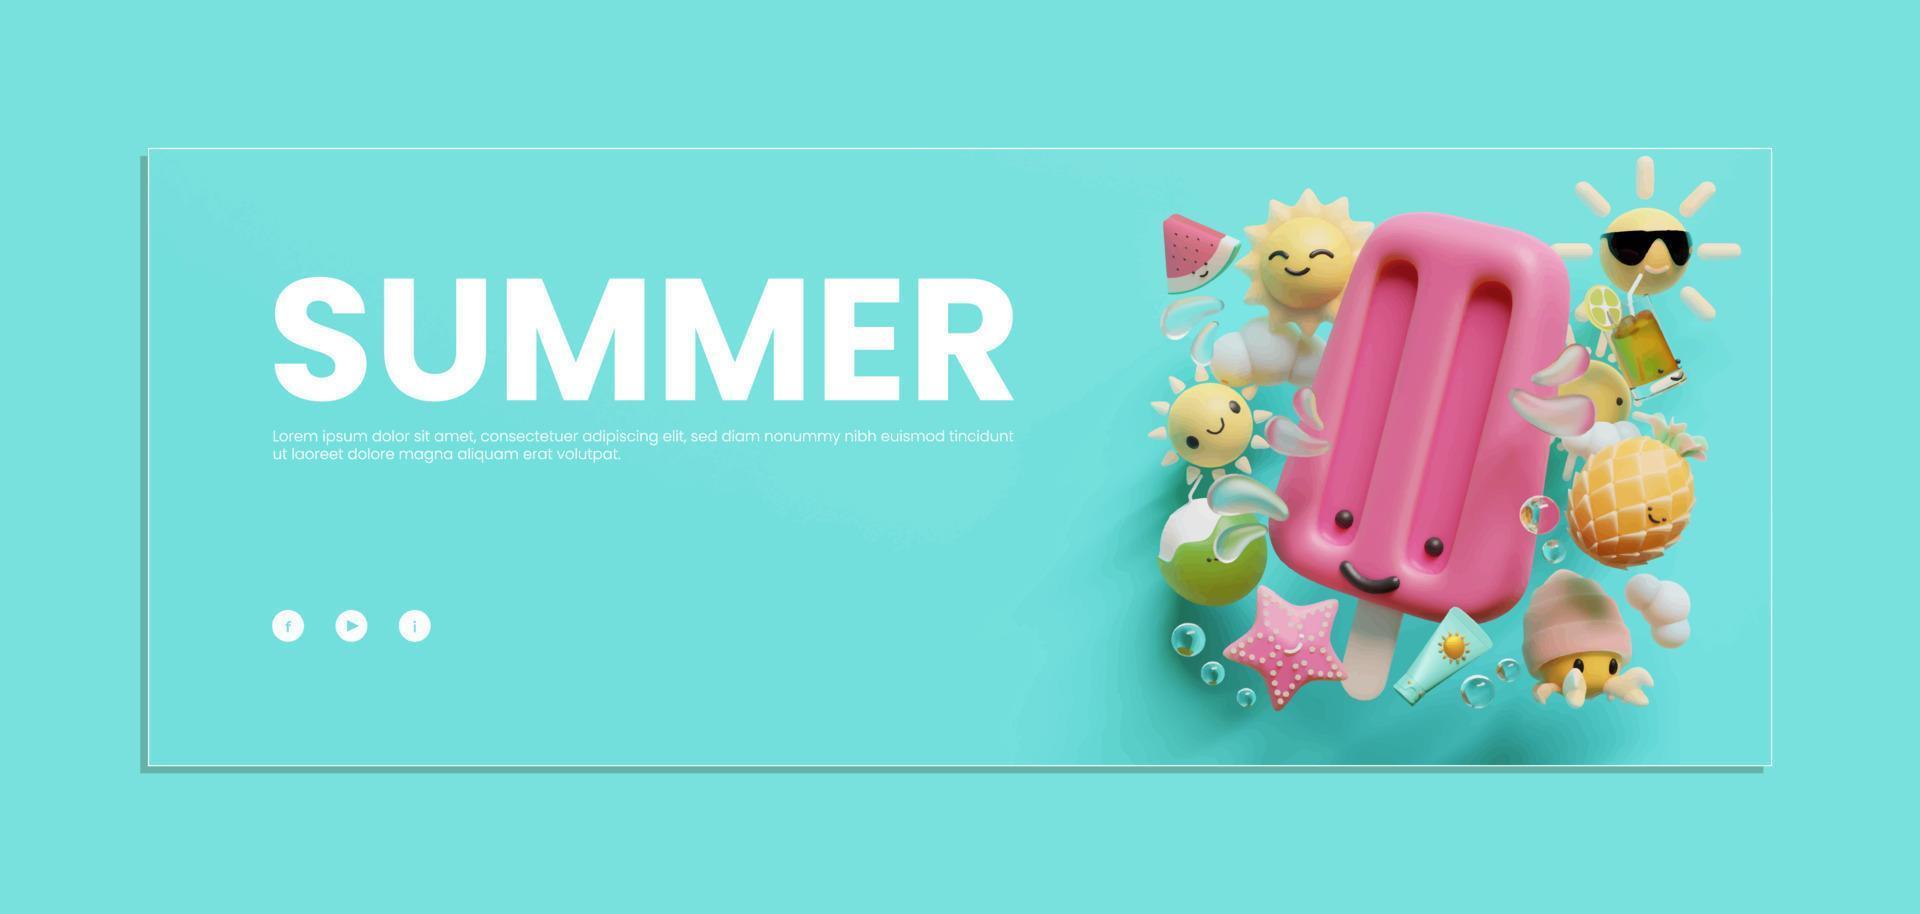 Summer Banner Template With Popsicle 3D Illustration vector